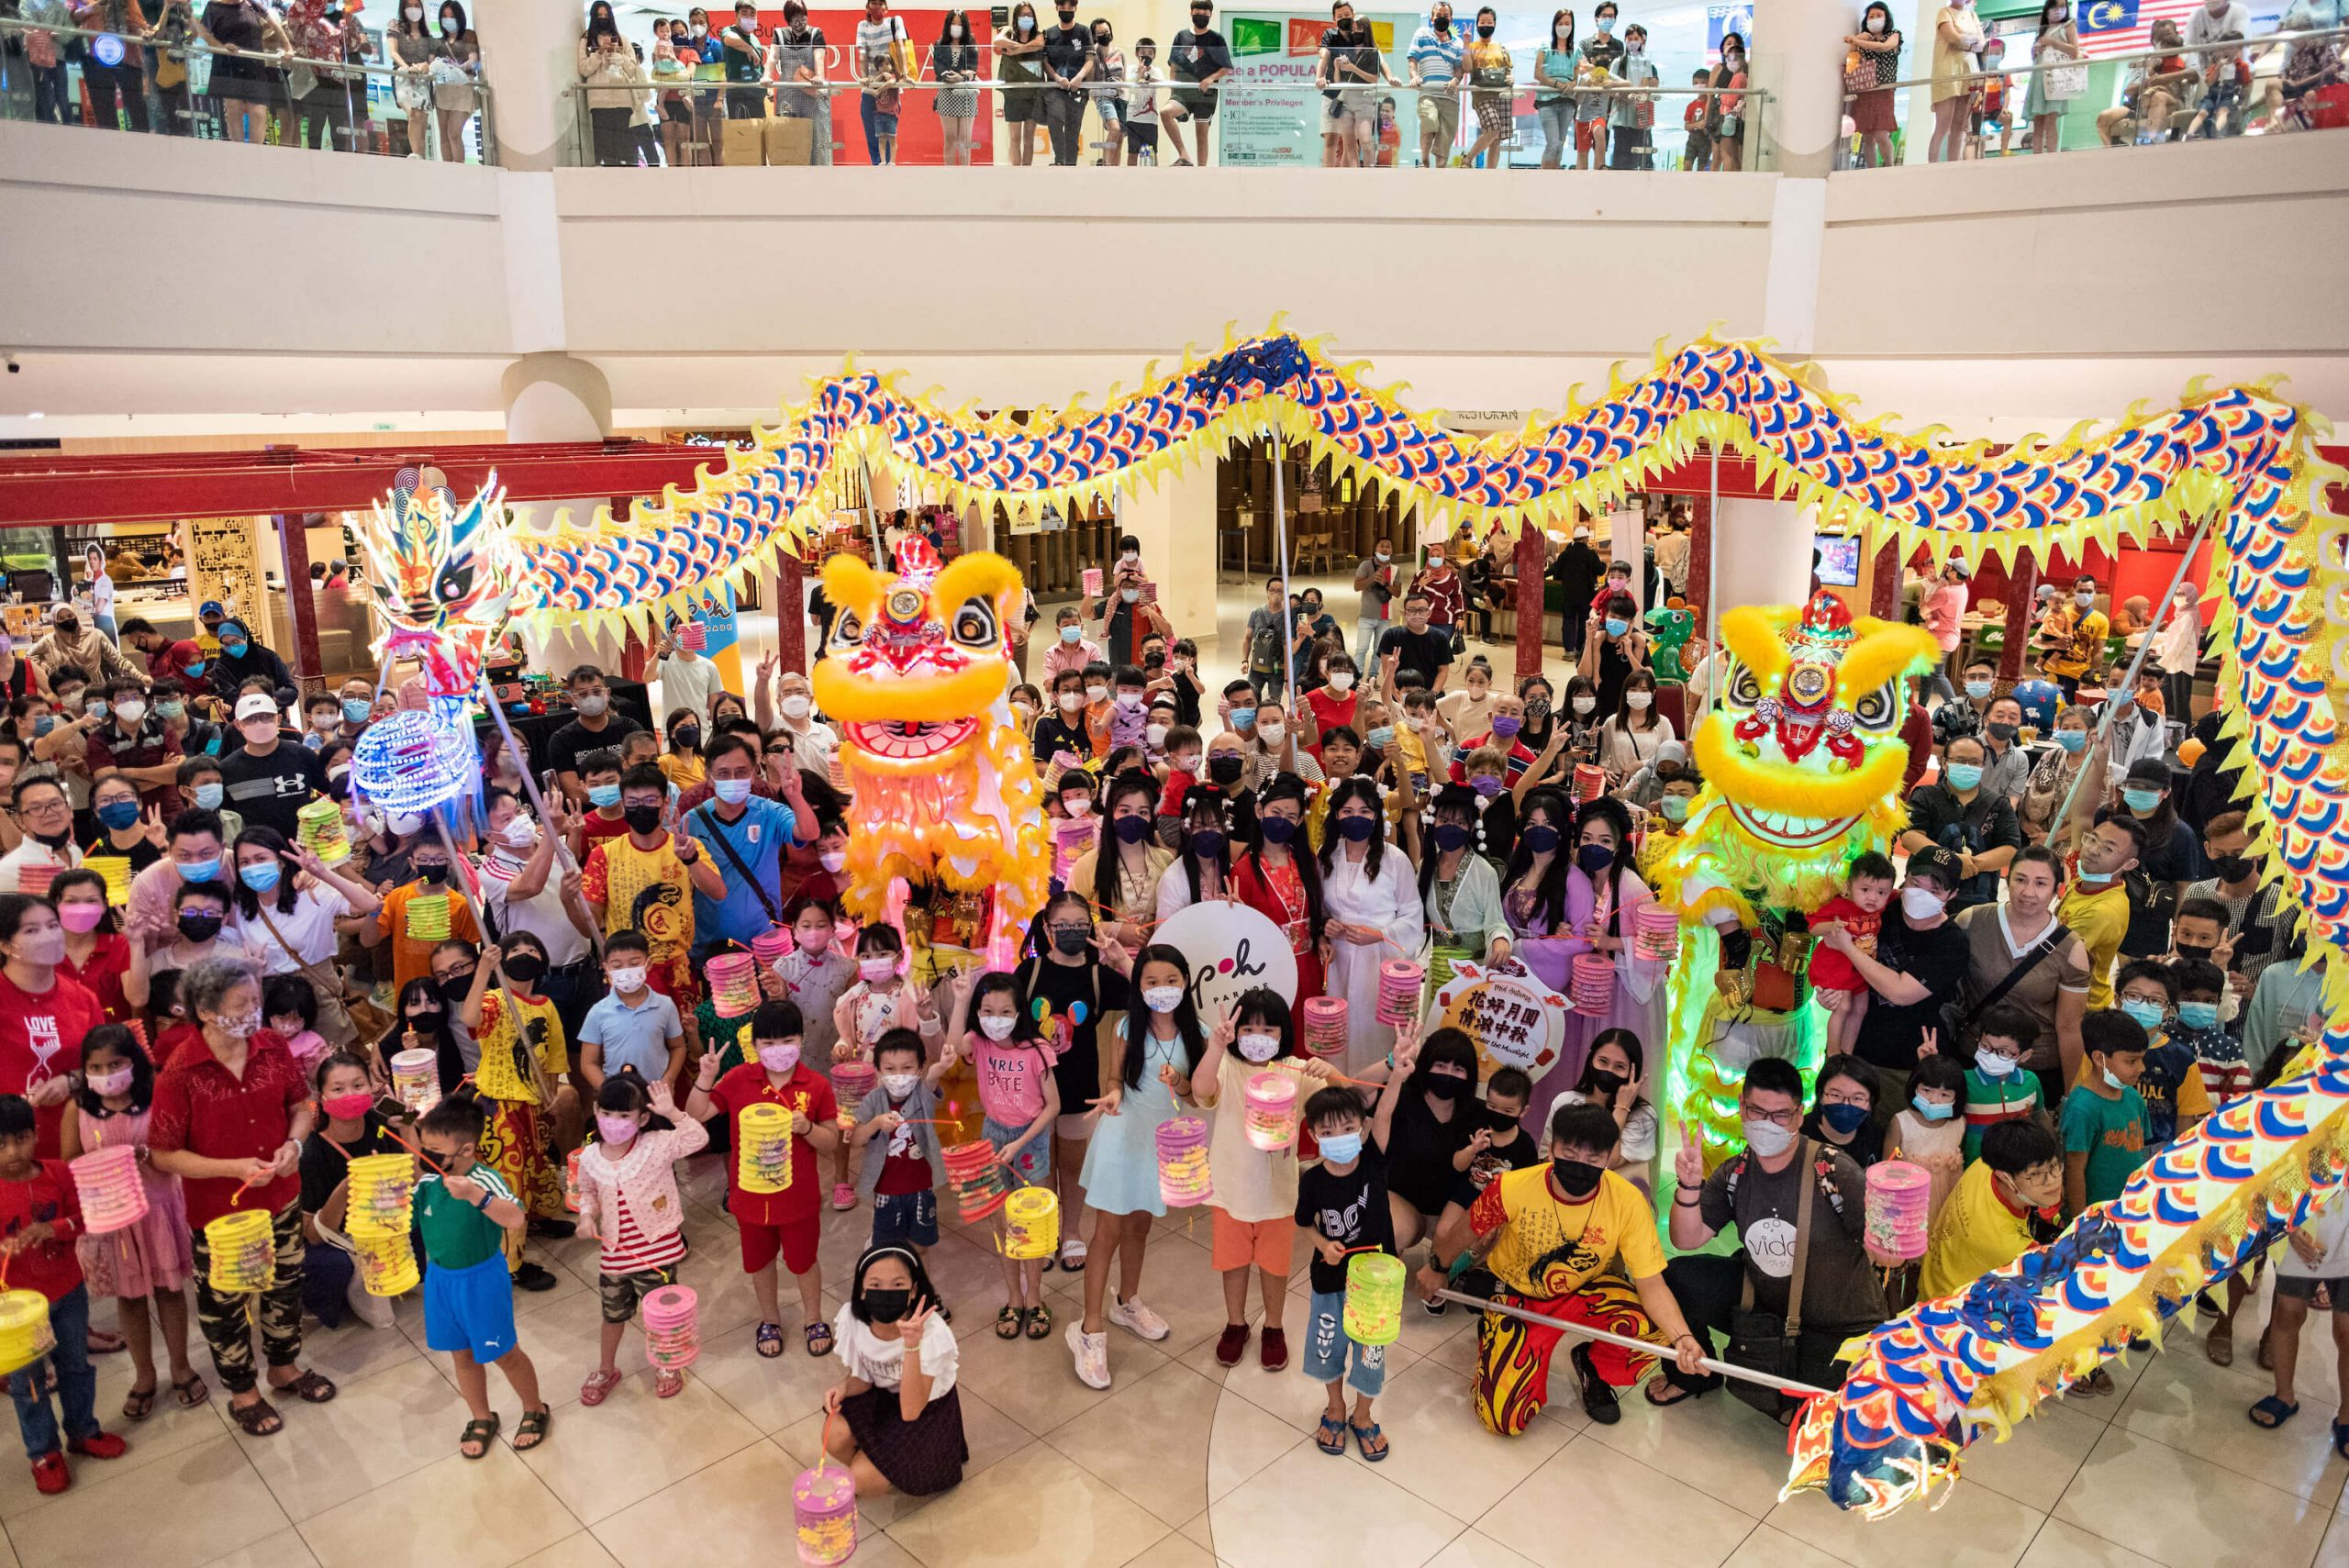 Ipoh Parade shares the festive joy by giving out 500 free lanterns to shoppers who joined in the lantern parade, led by the LED Dragon and Lions troupe, accompanied by the 7 fairies on Saturday